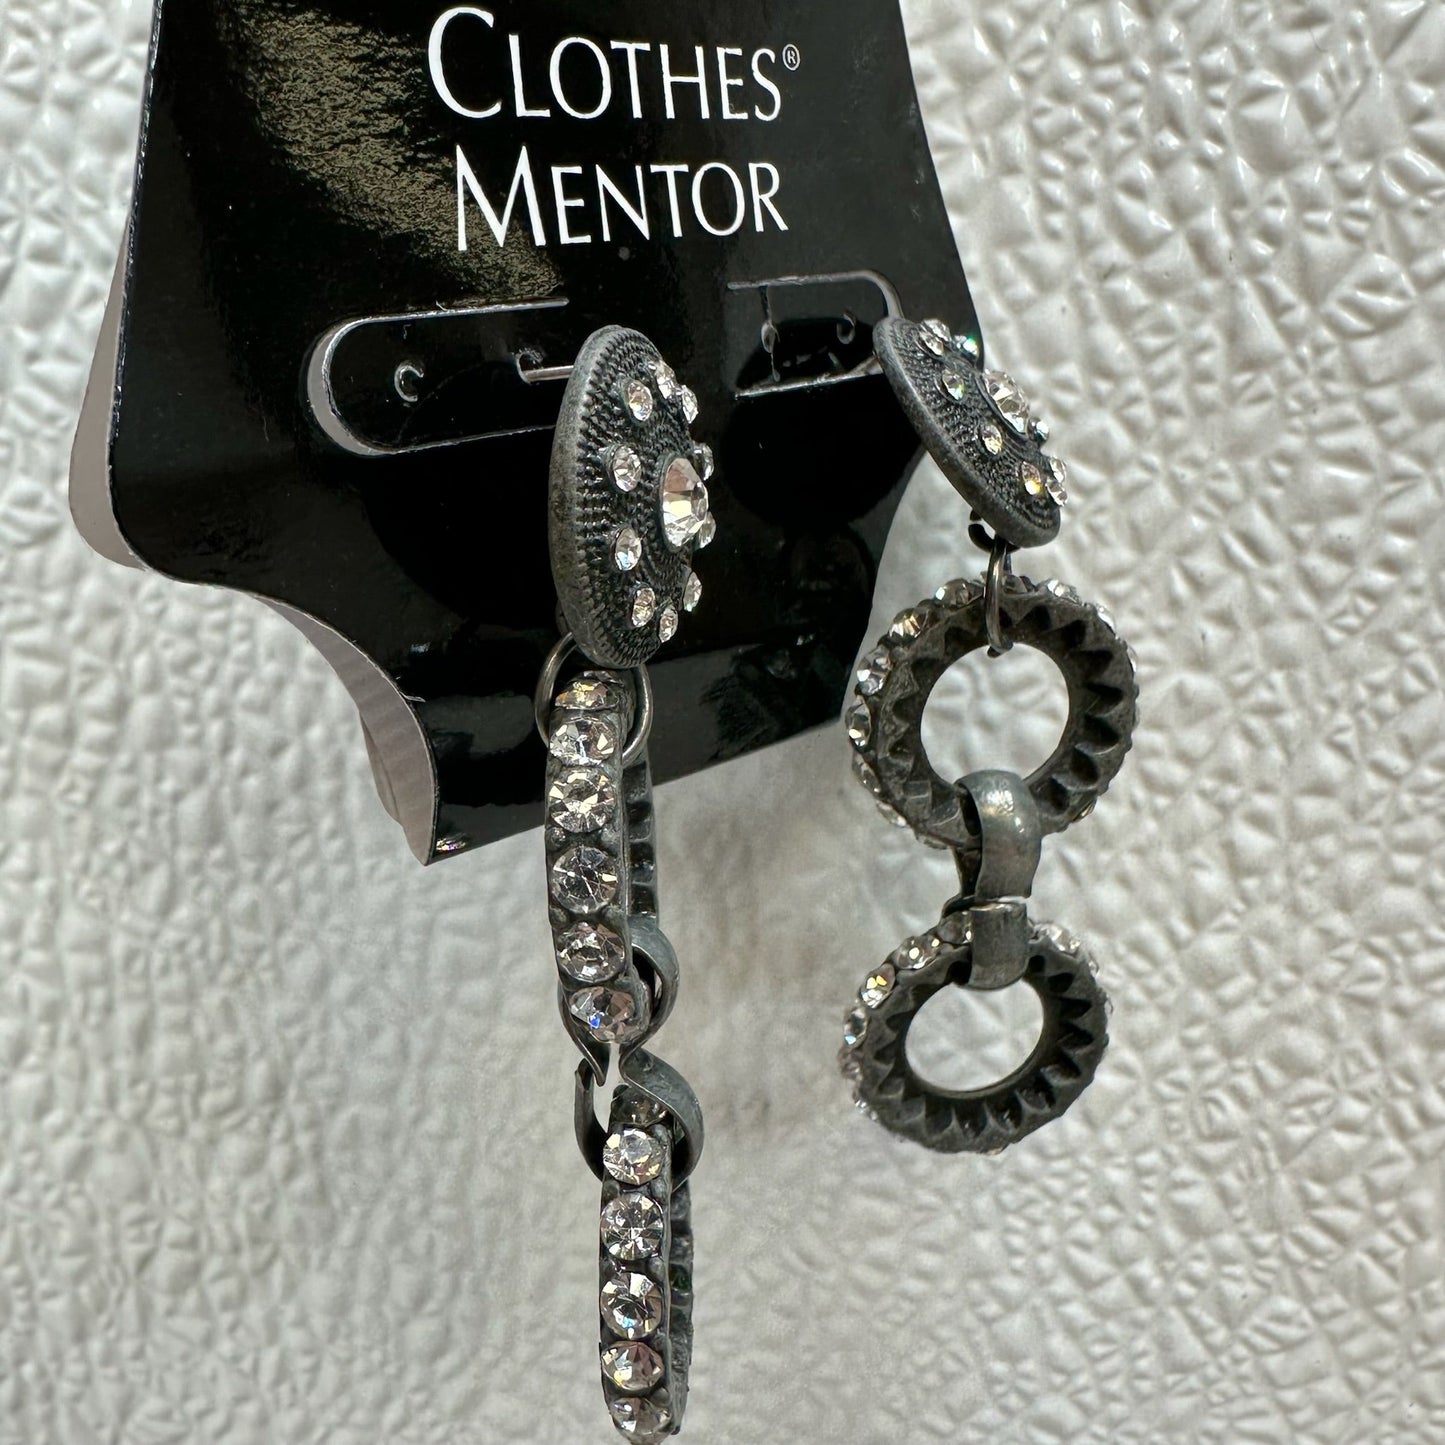 Earrings Chandelier By Clothes Mentor